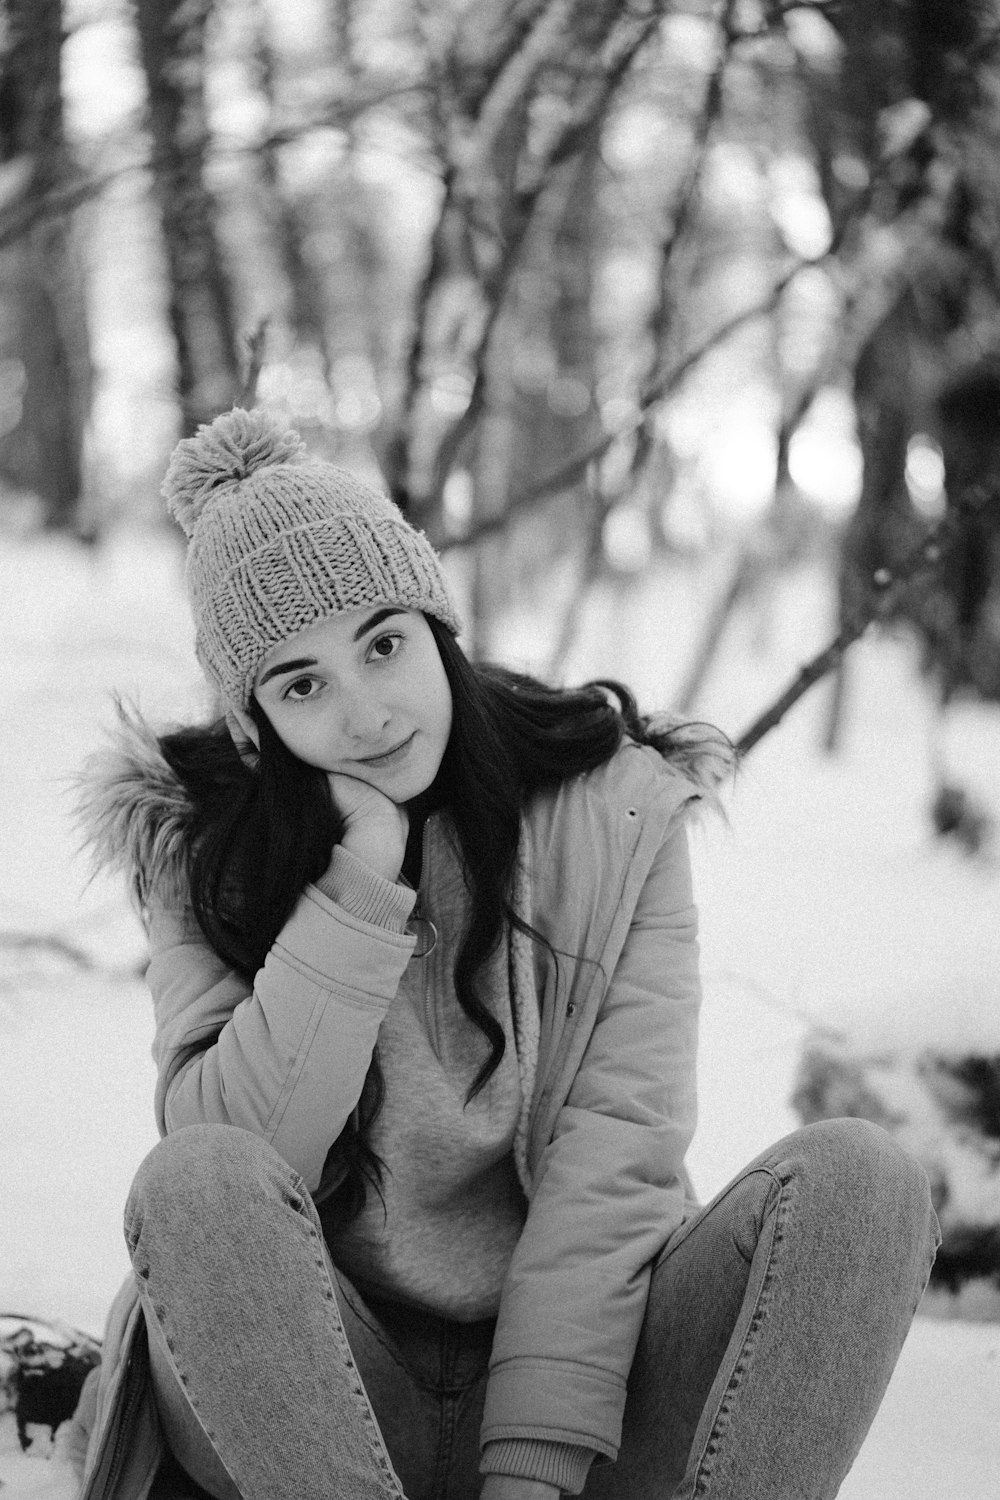 grayscale photo of woman in knit cap and jacket sitting on snow covered ground